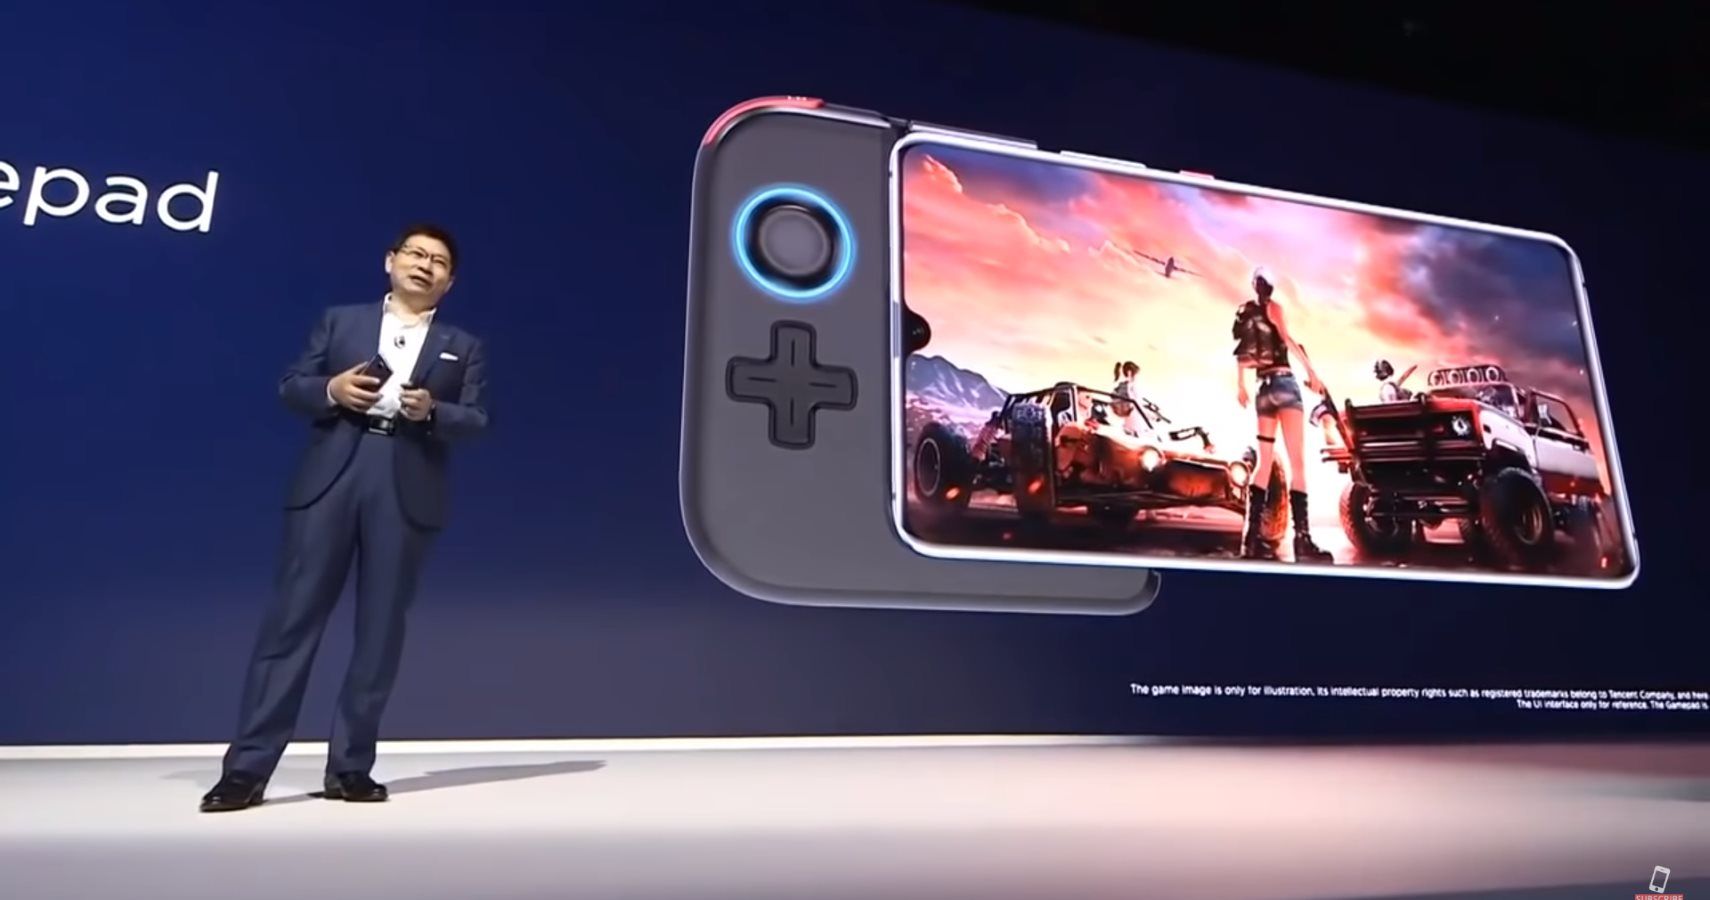 Huawei's New 7.2-Inch Gaming Phone, The Mate 20 X, Enters The Portable Gaming Market